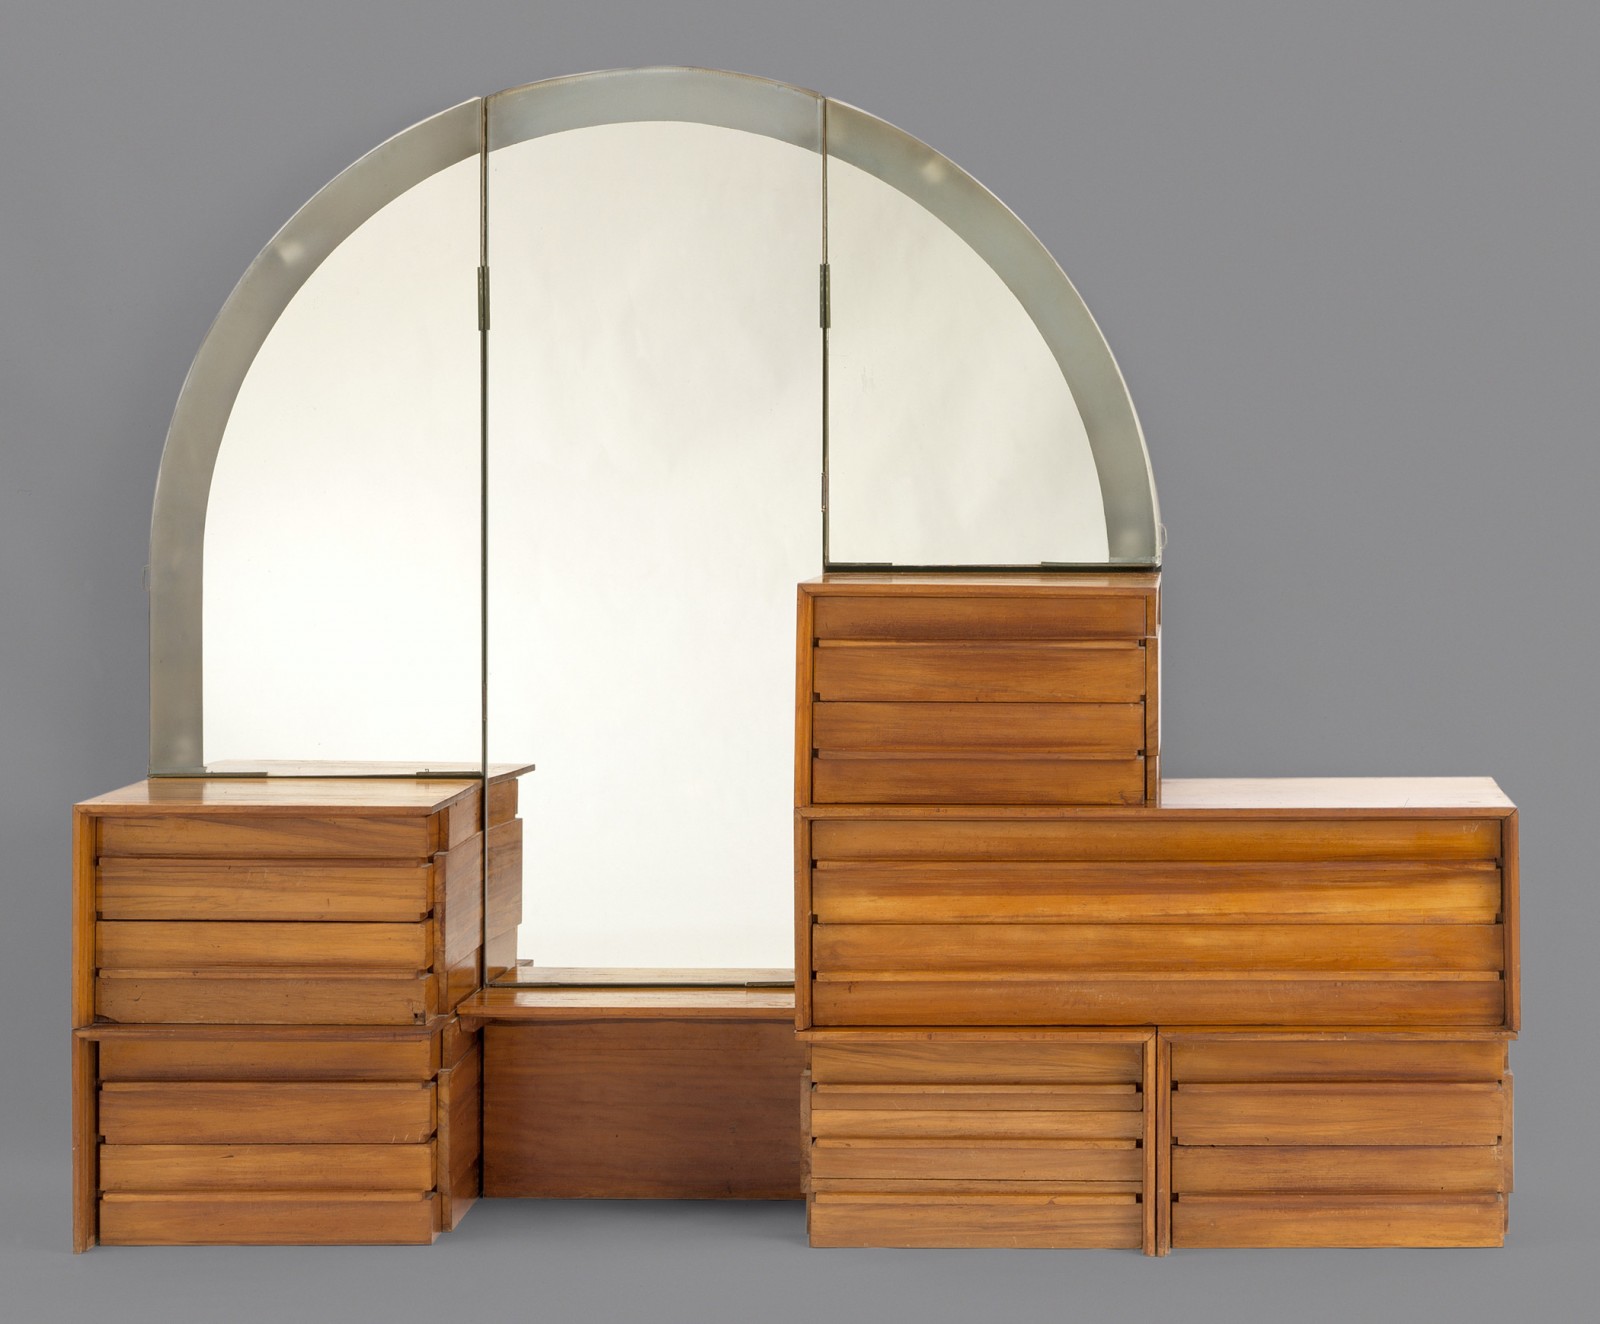 Image: Schindler, Rudolph, Bedroom Dresser with Hinged Half-Round Mirror and Stool from the Shep Commission, Los Angeles, 1936–1938